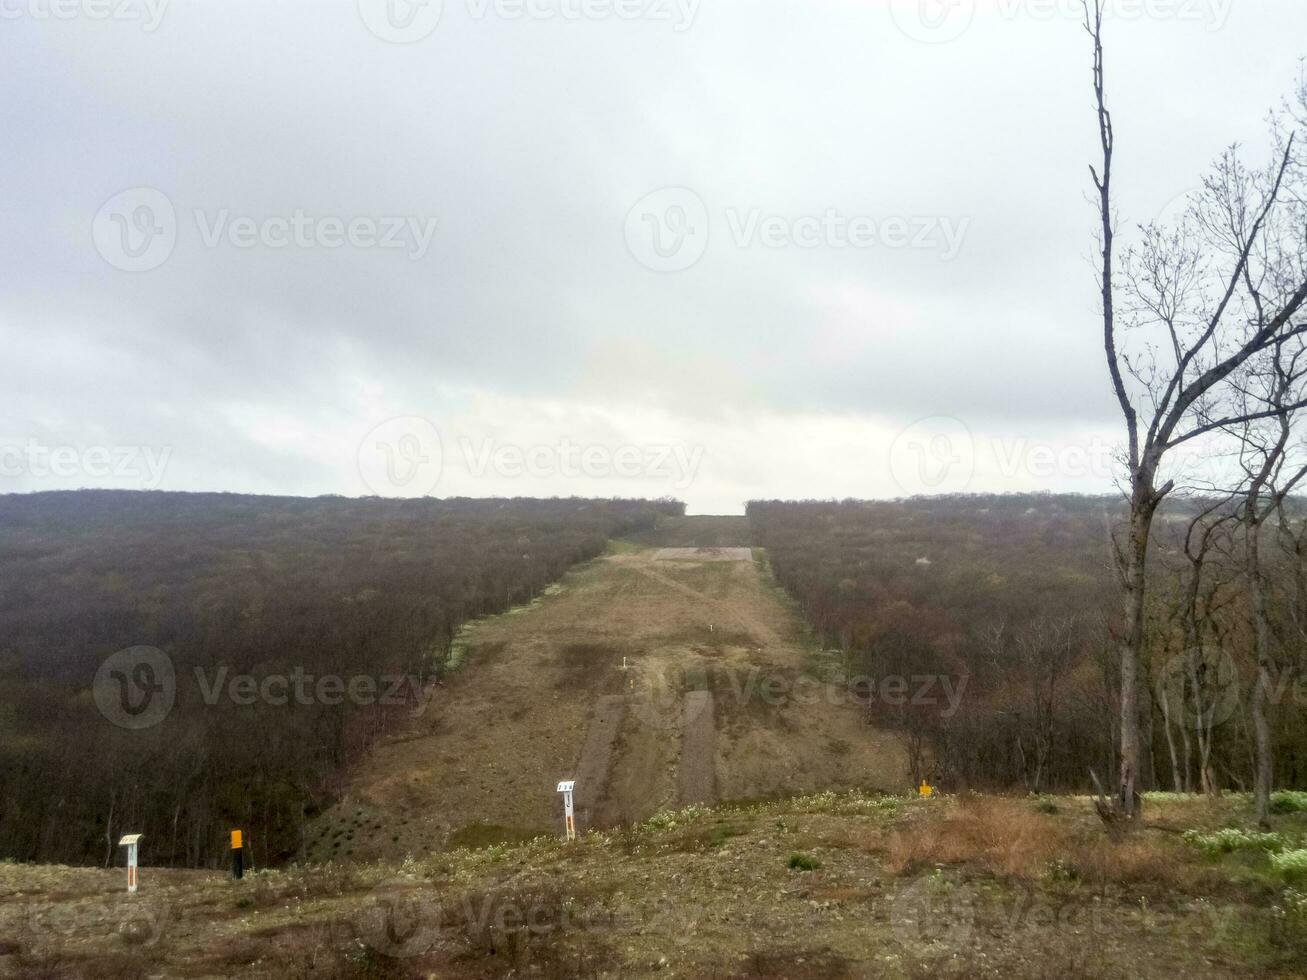 A clearing in the forest for the gas pipeline photo